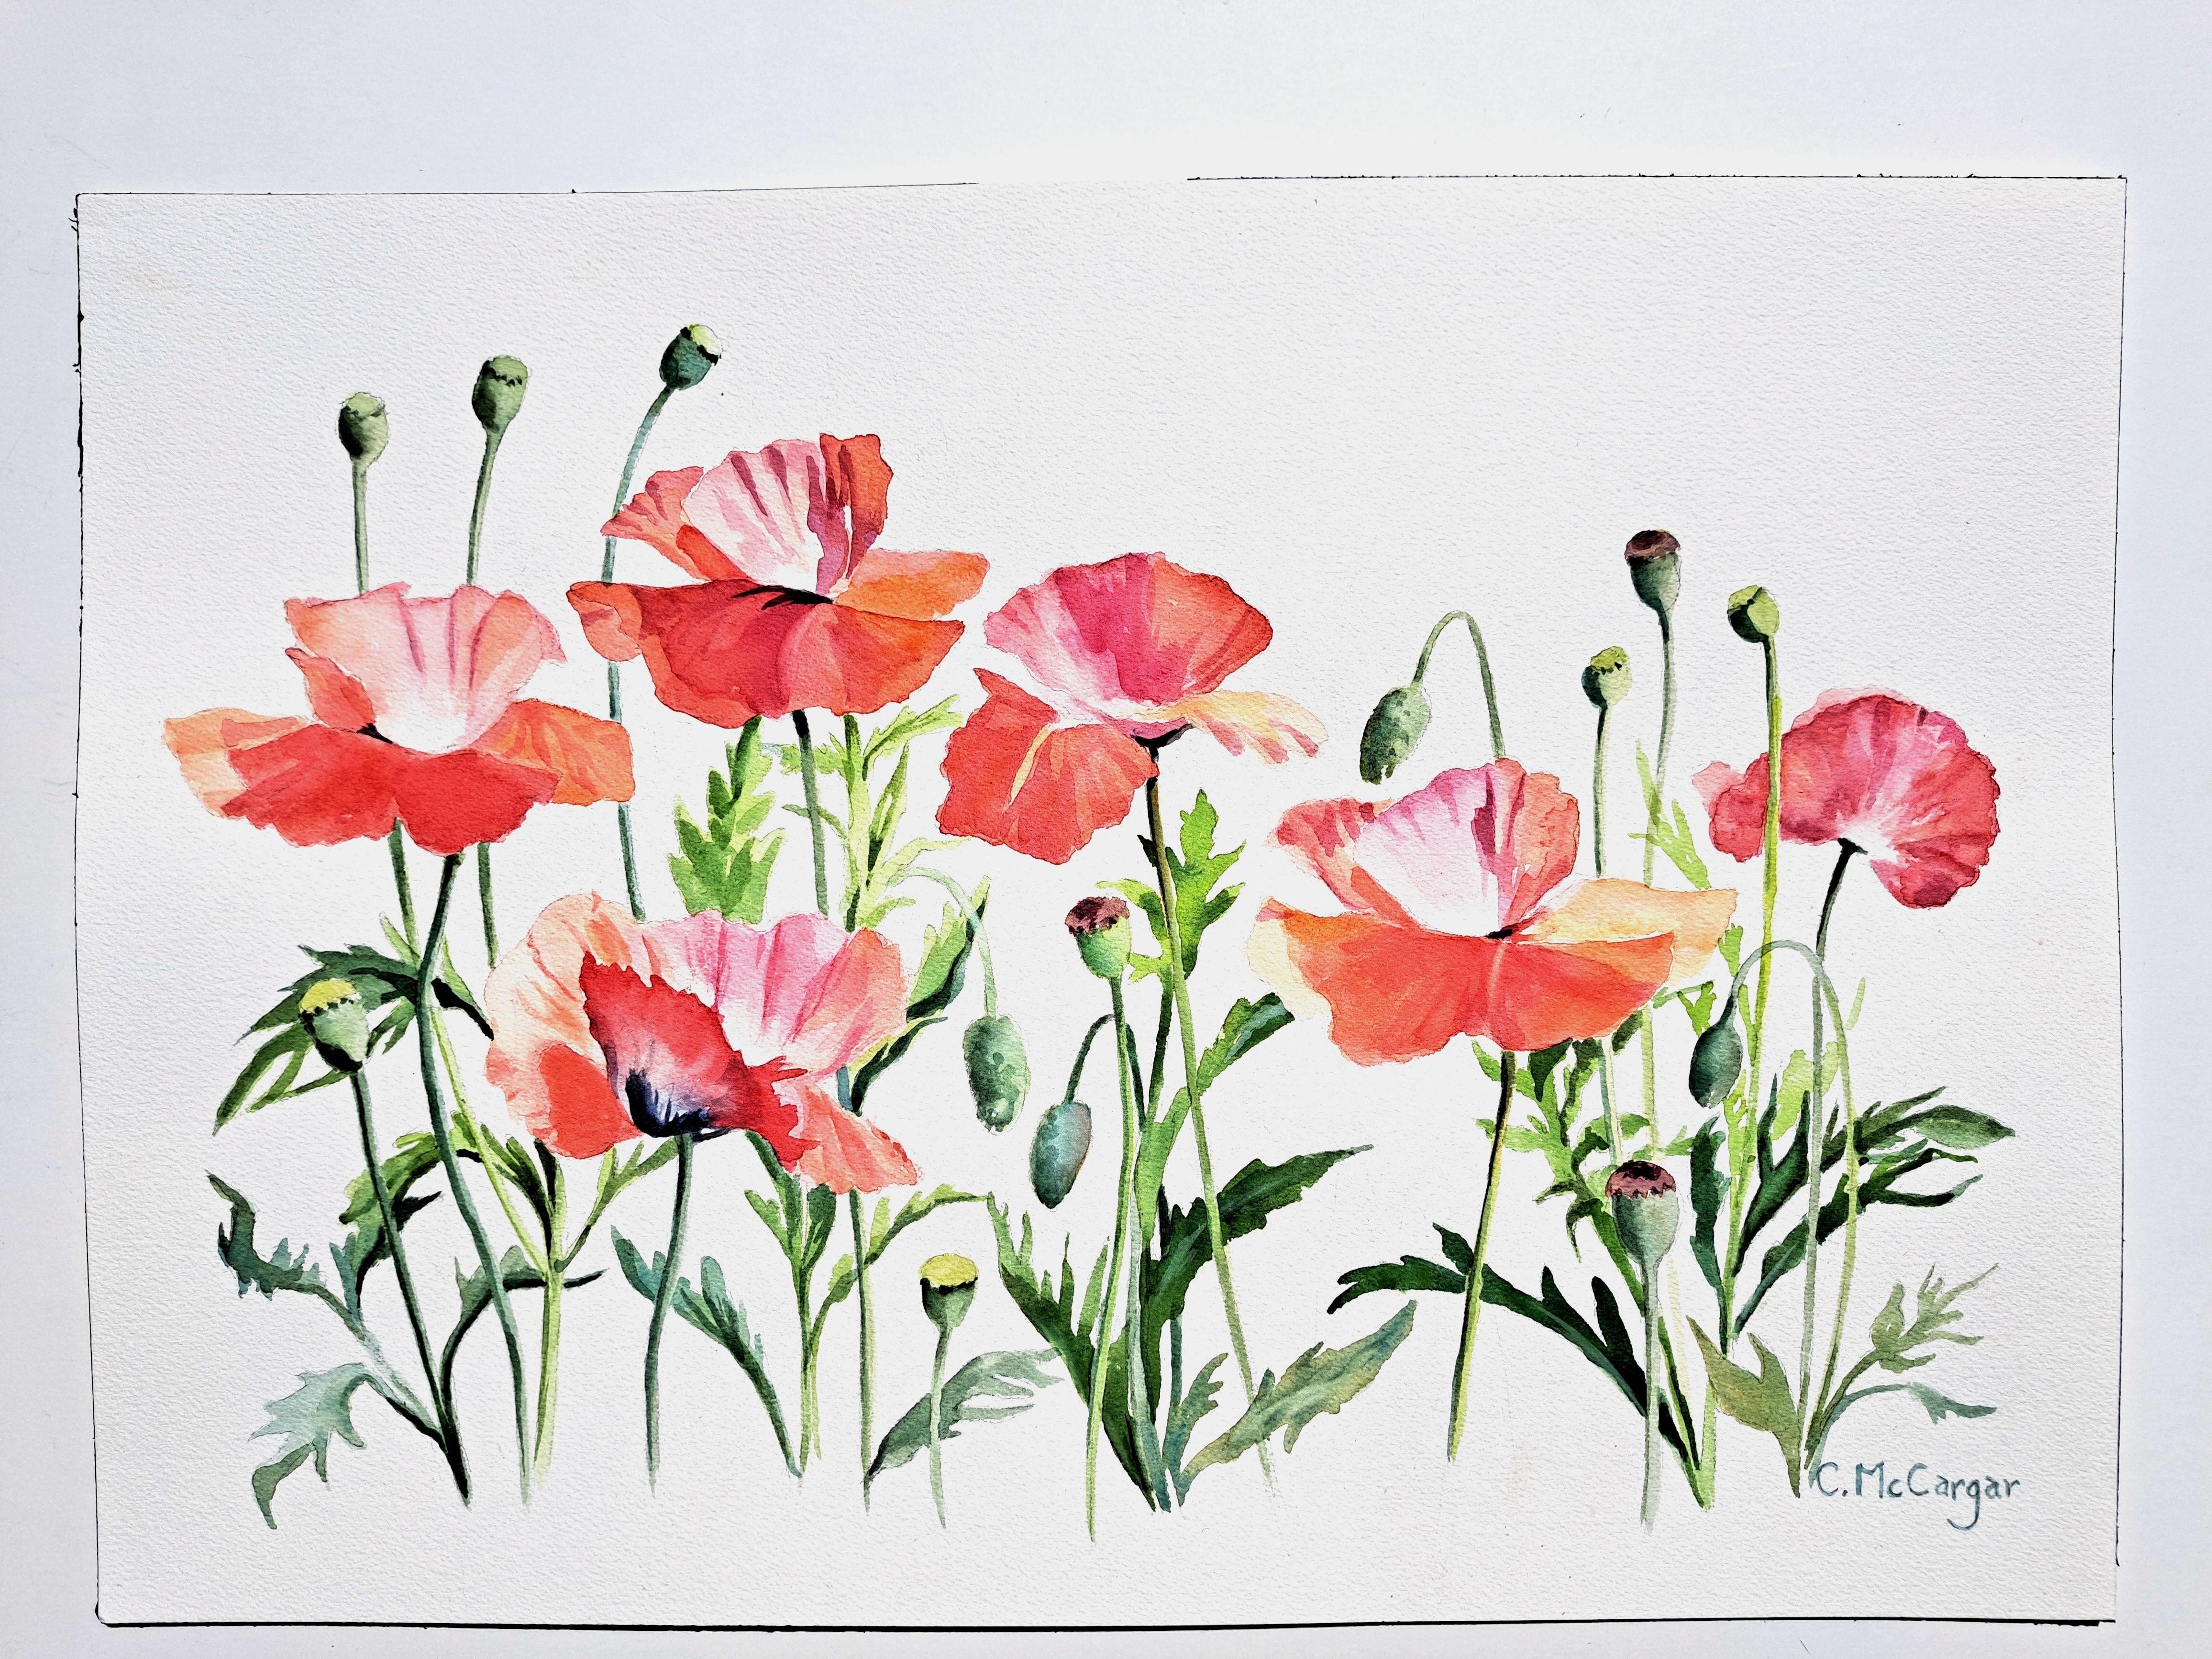 <p>Artist Comments<br>Artist Catherine McCargar illustrates alluring red flowers in a background of white. She captures the delicacy and transparency of gorgeous poppies she noticed in a local public garden. She creates a somewhat stylized